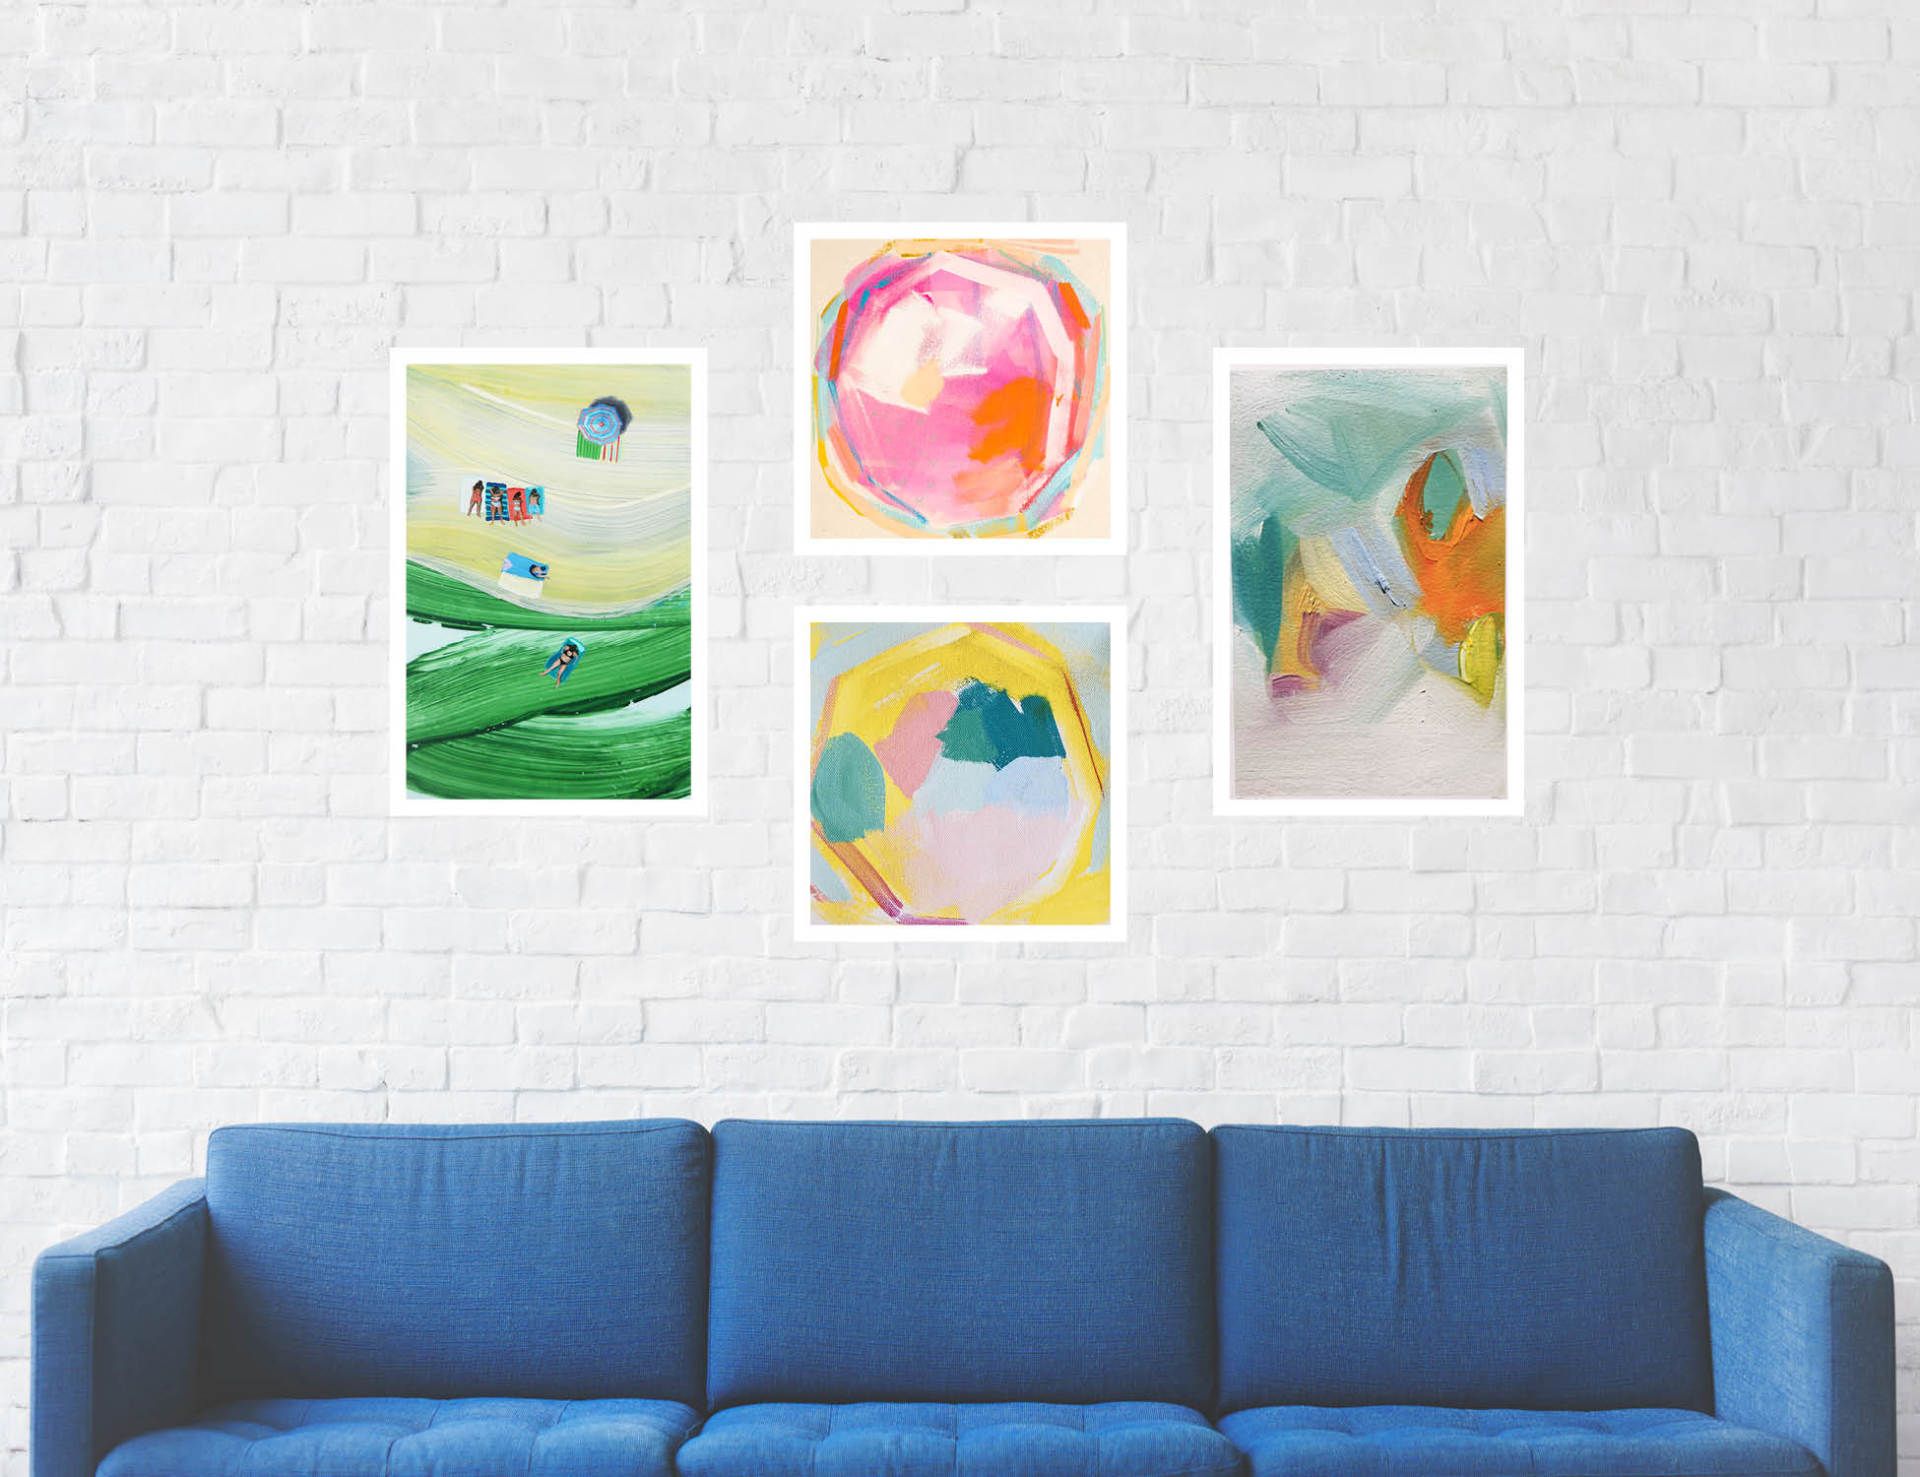 Gallery wall package #3